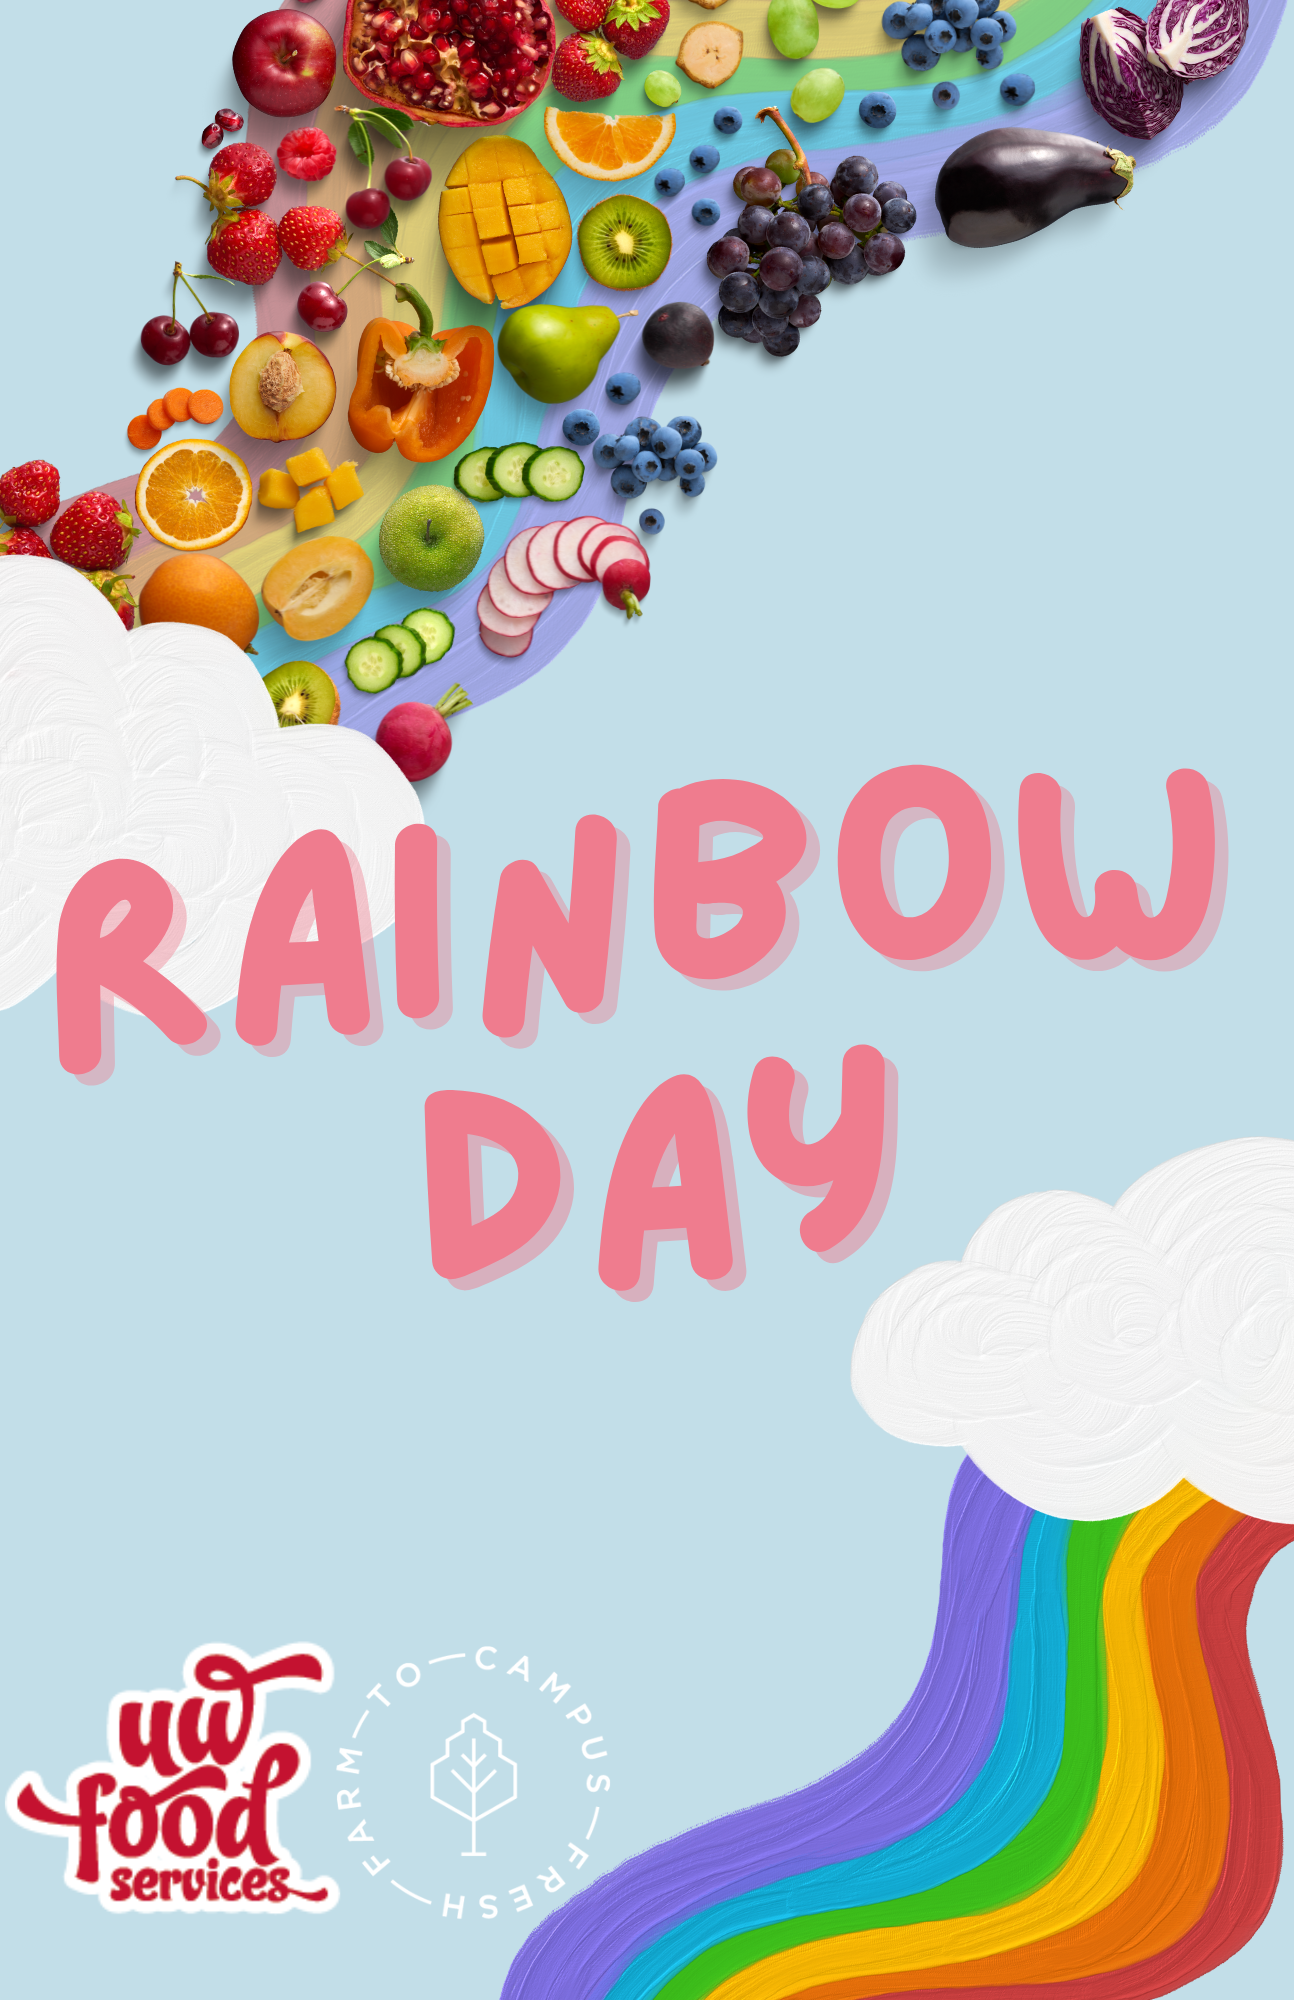 Rainbow Day poster